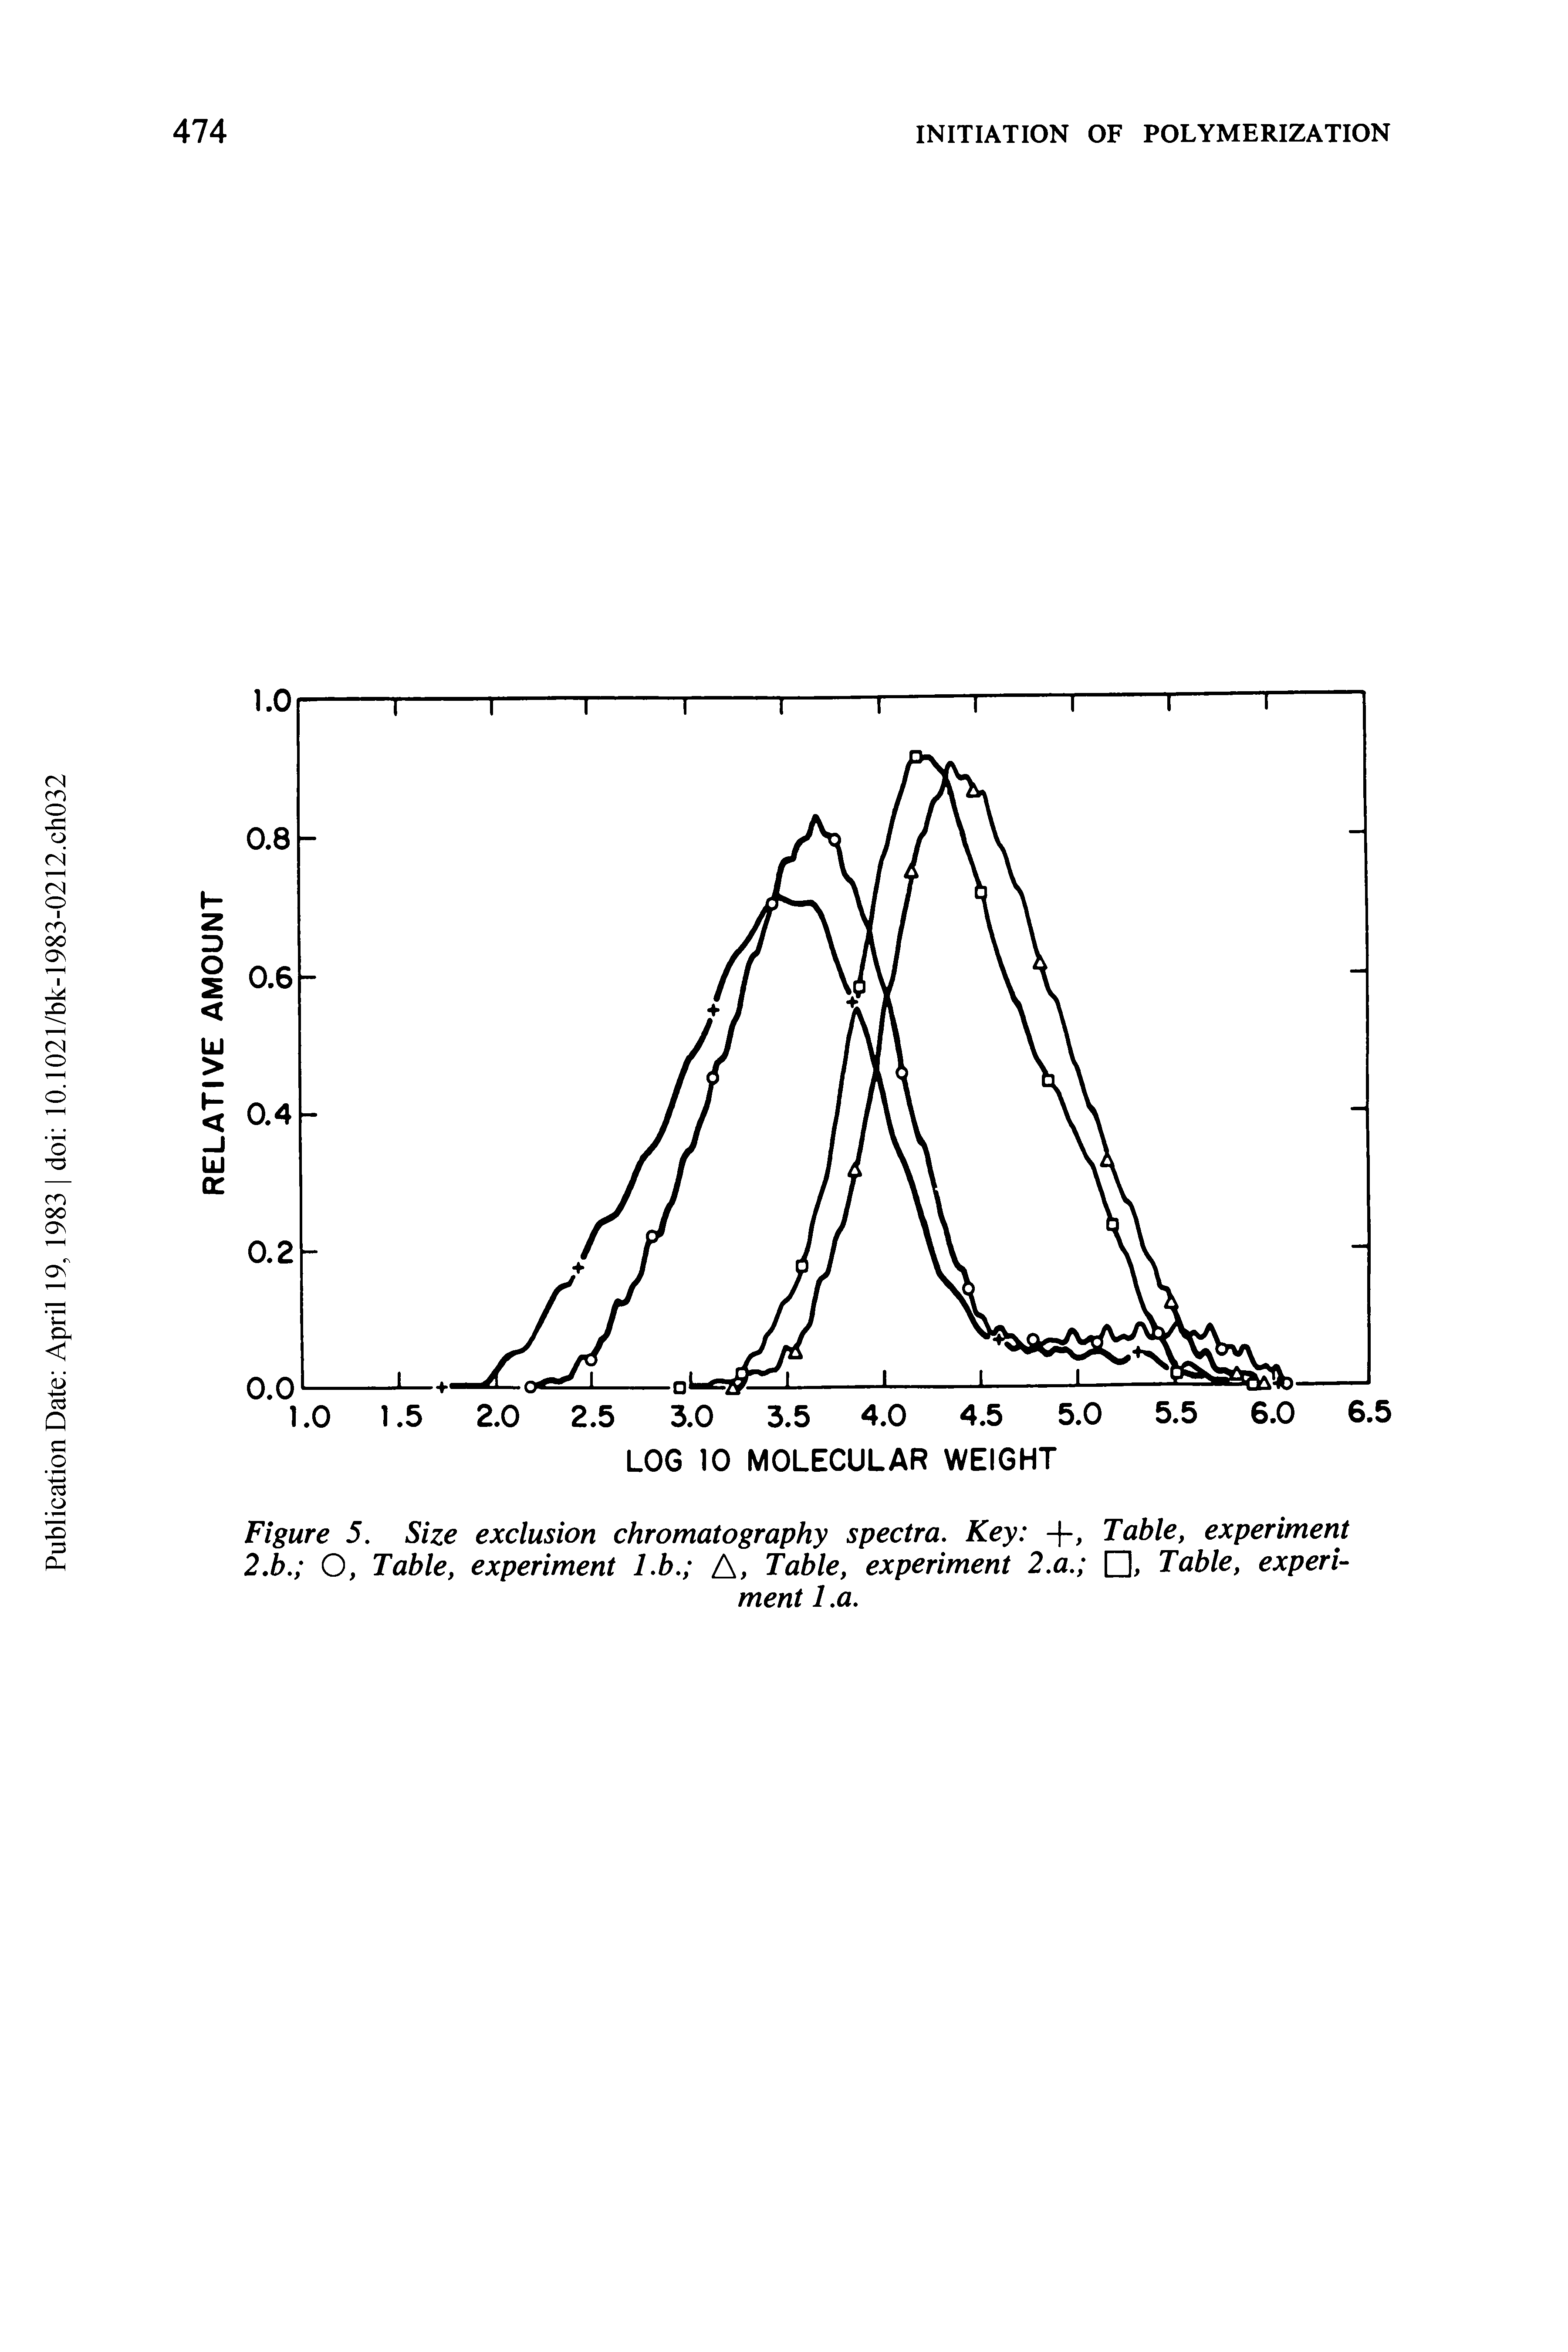 Figure 5. Size exclusion chromatography spectra. Key +, Table, experiment 2,b. O, Table, experiment Lb. A, Table, experiment 2.a. Table, experiment l.a.